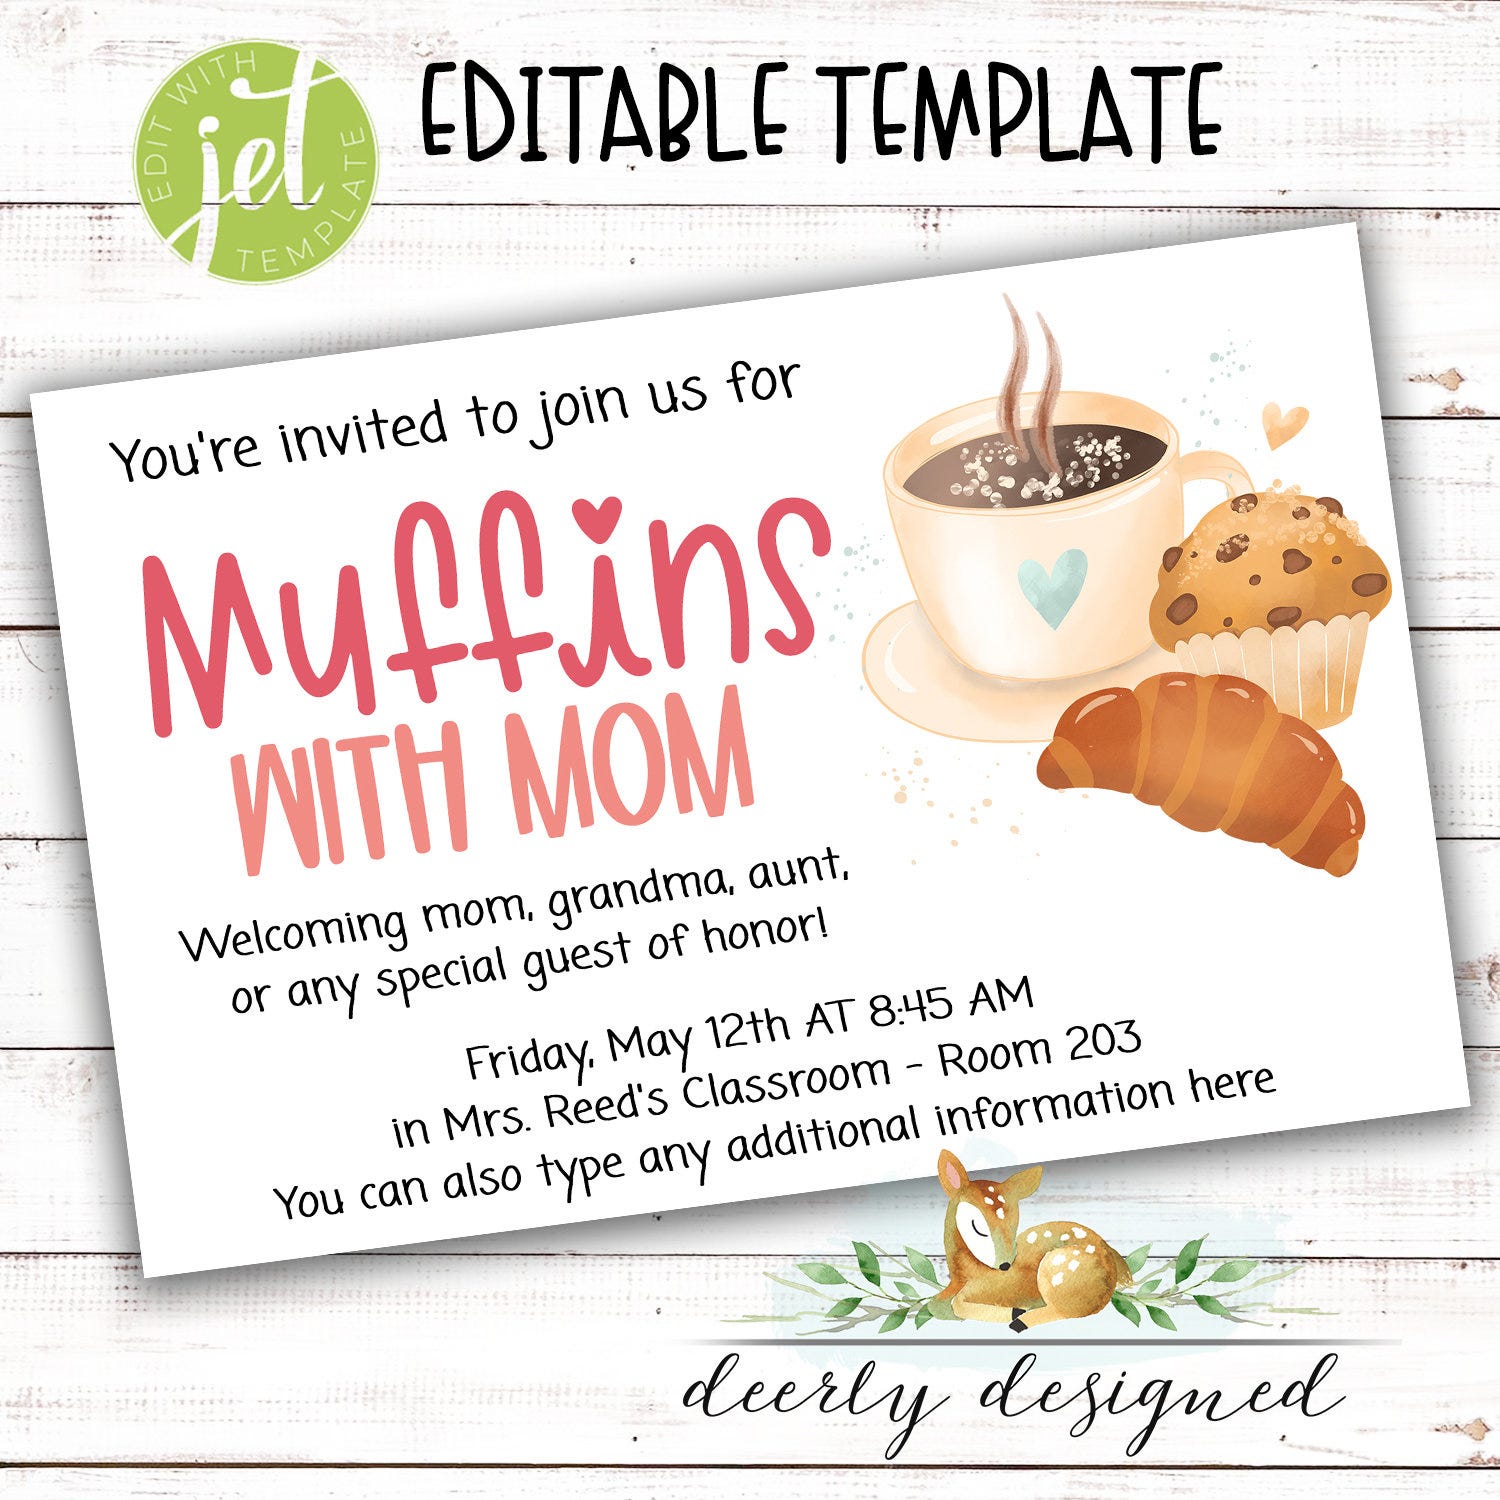 EDITABLE Muffins With Mom Invitation - Mother